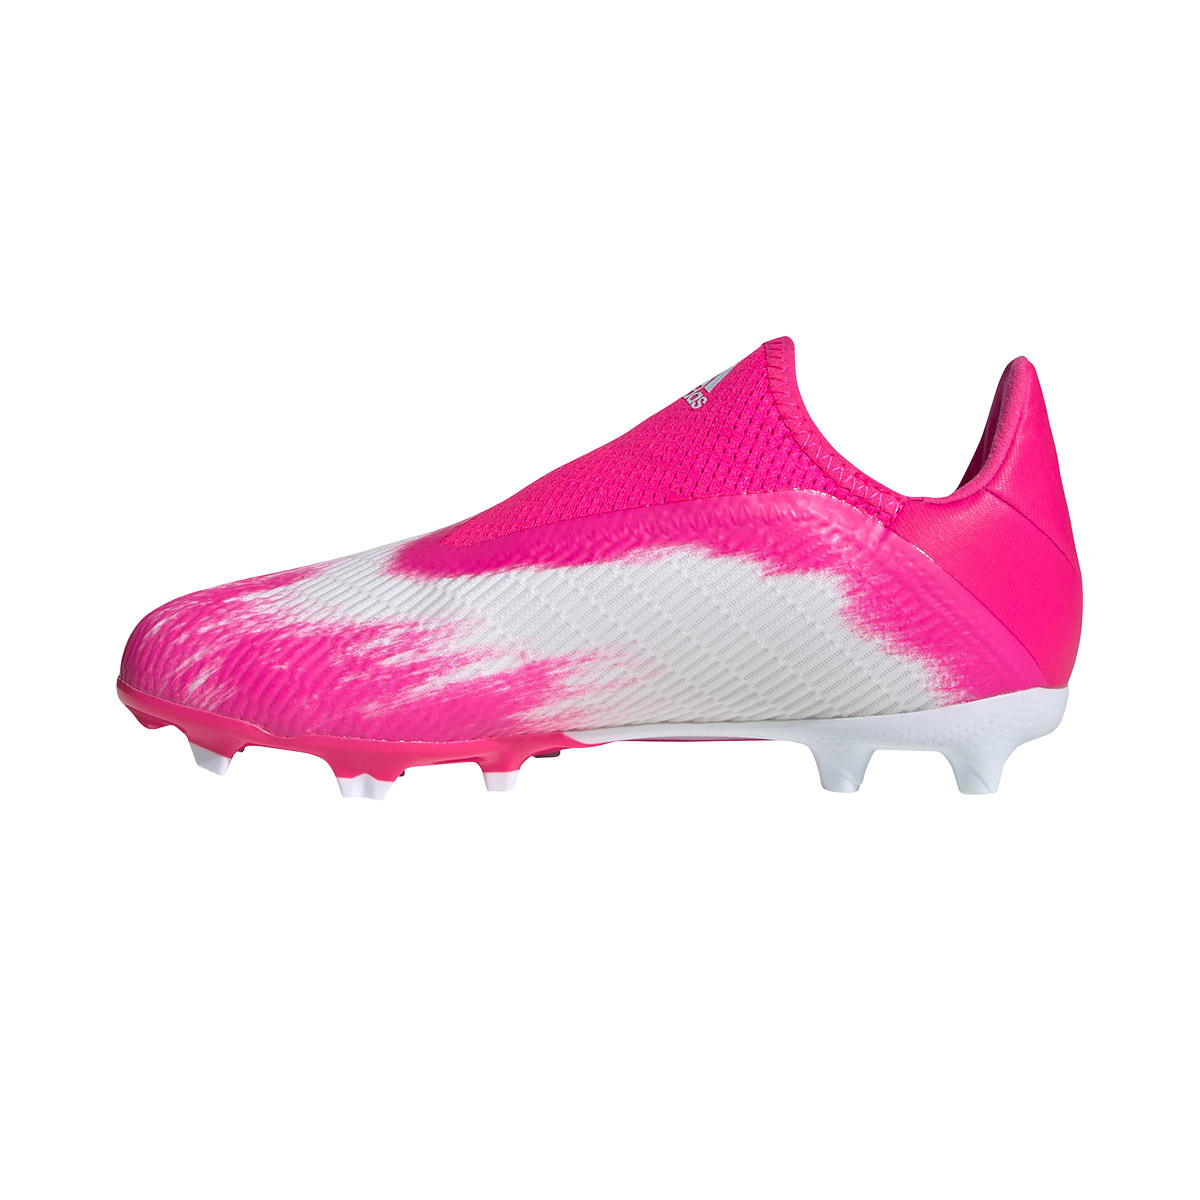 adidas soccer boots pink